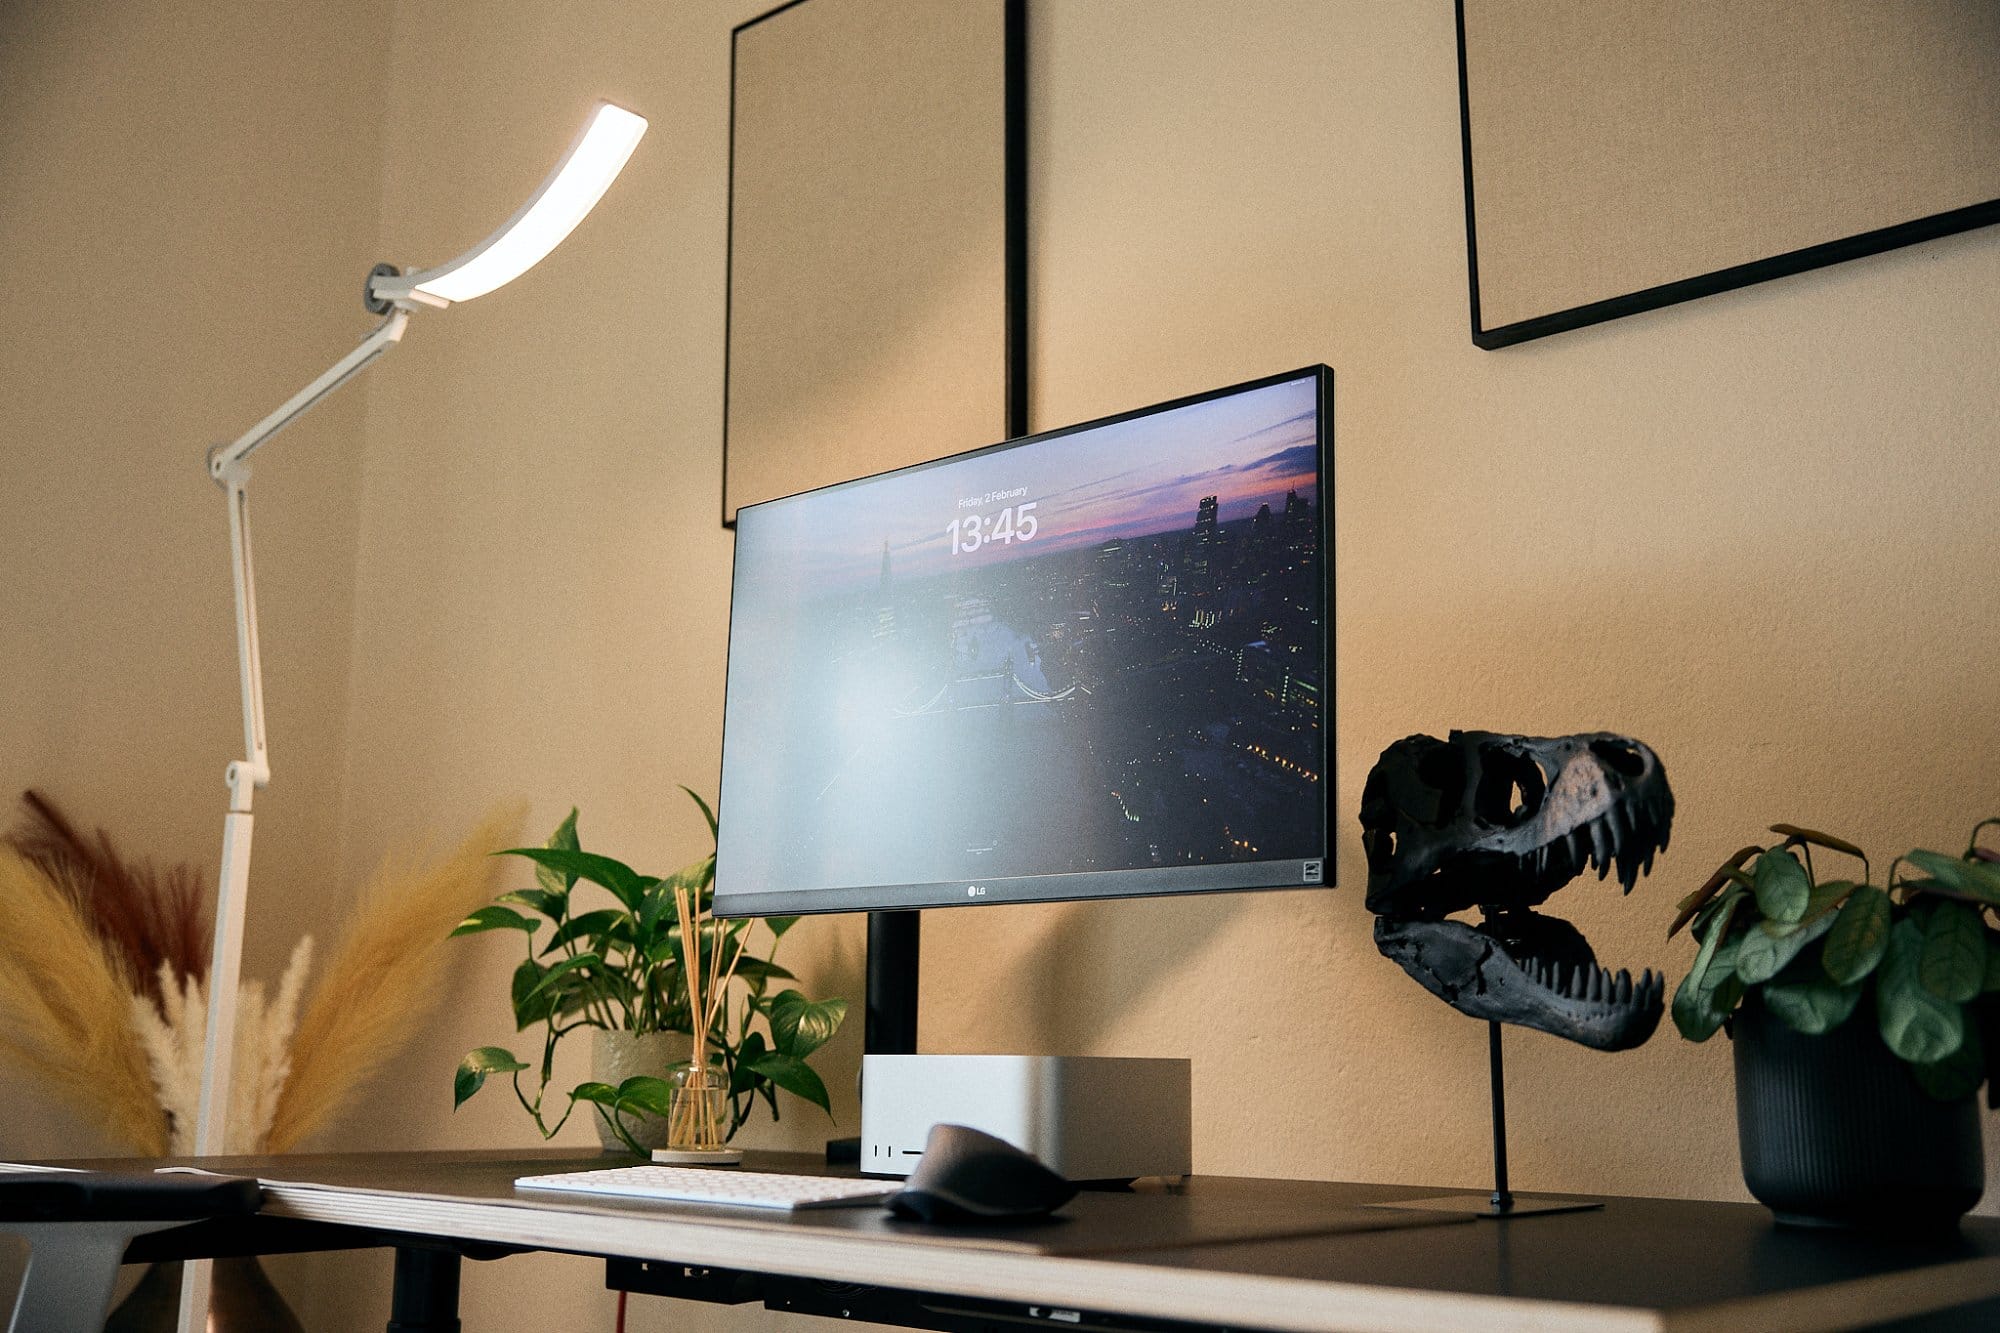 A modern workspace illuminated by a sleek desk lamp, featuring a monitor with a cityscape background, a dinosaur skull model, a green potted plant, and some dried pampas grass decoration